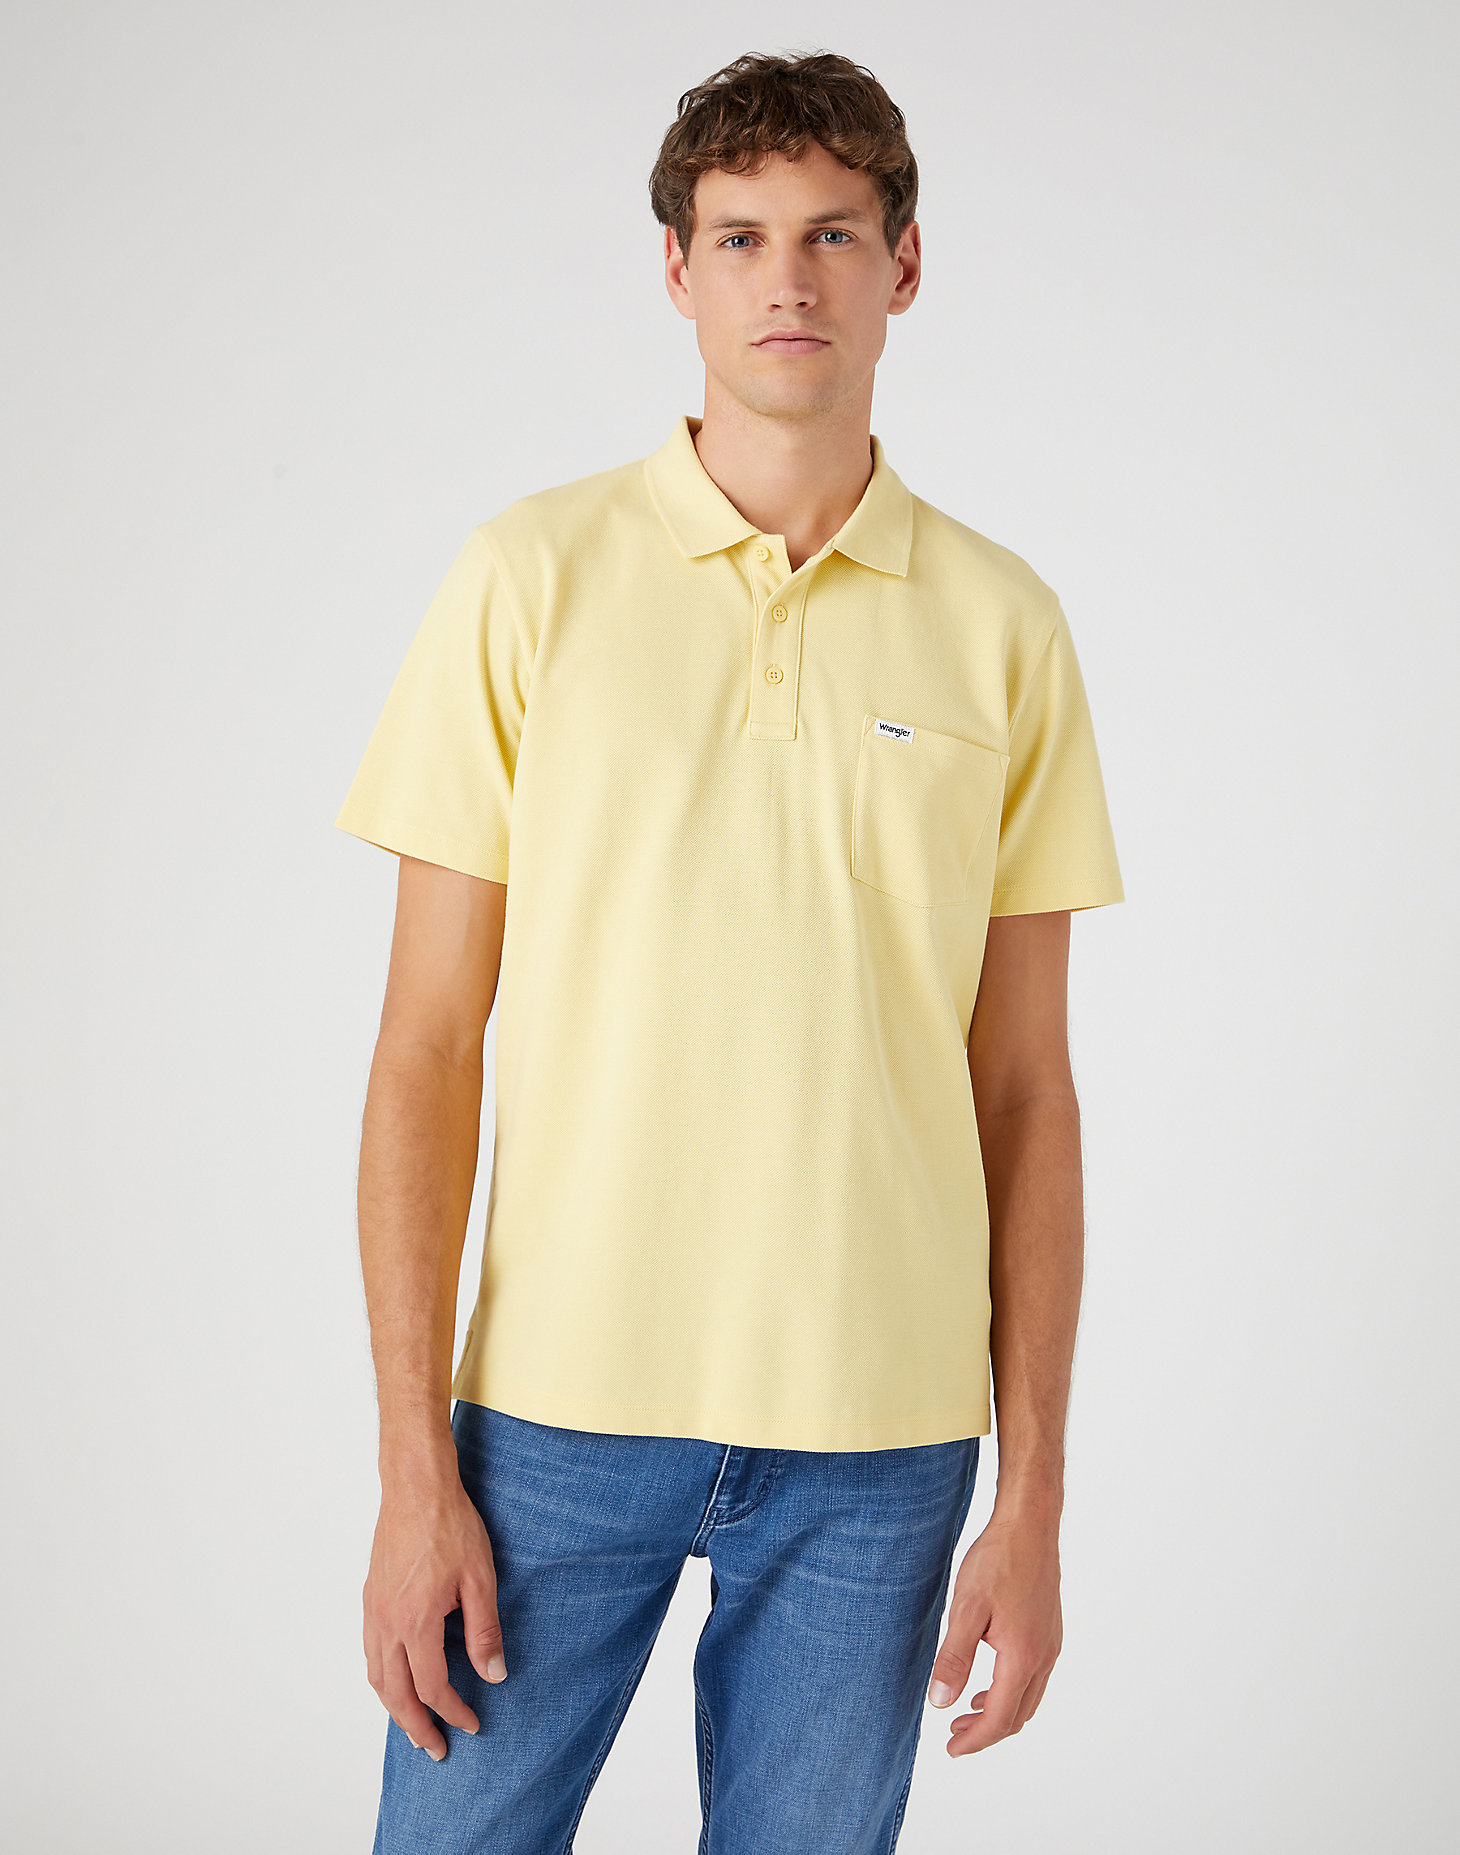 Polo Shirt in Pineapple Slice main view